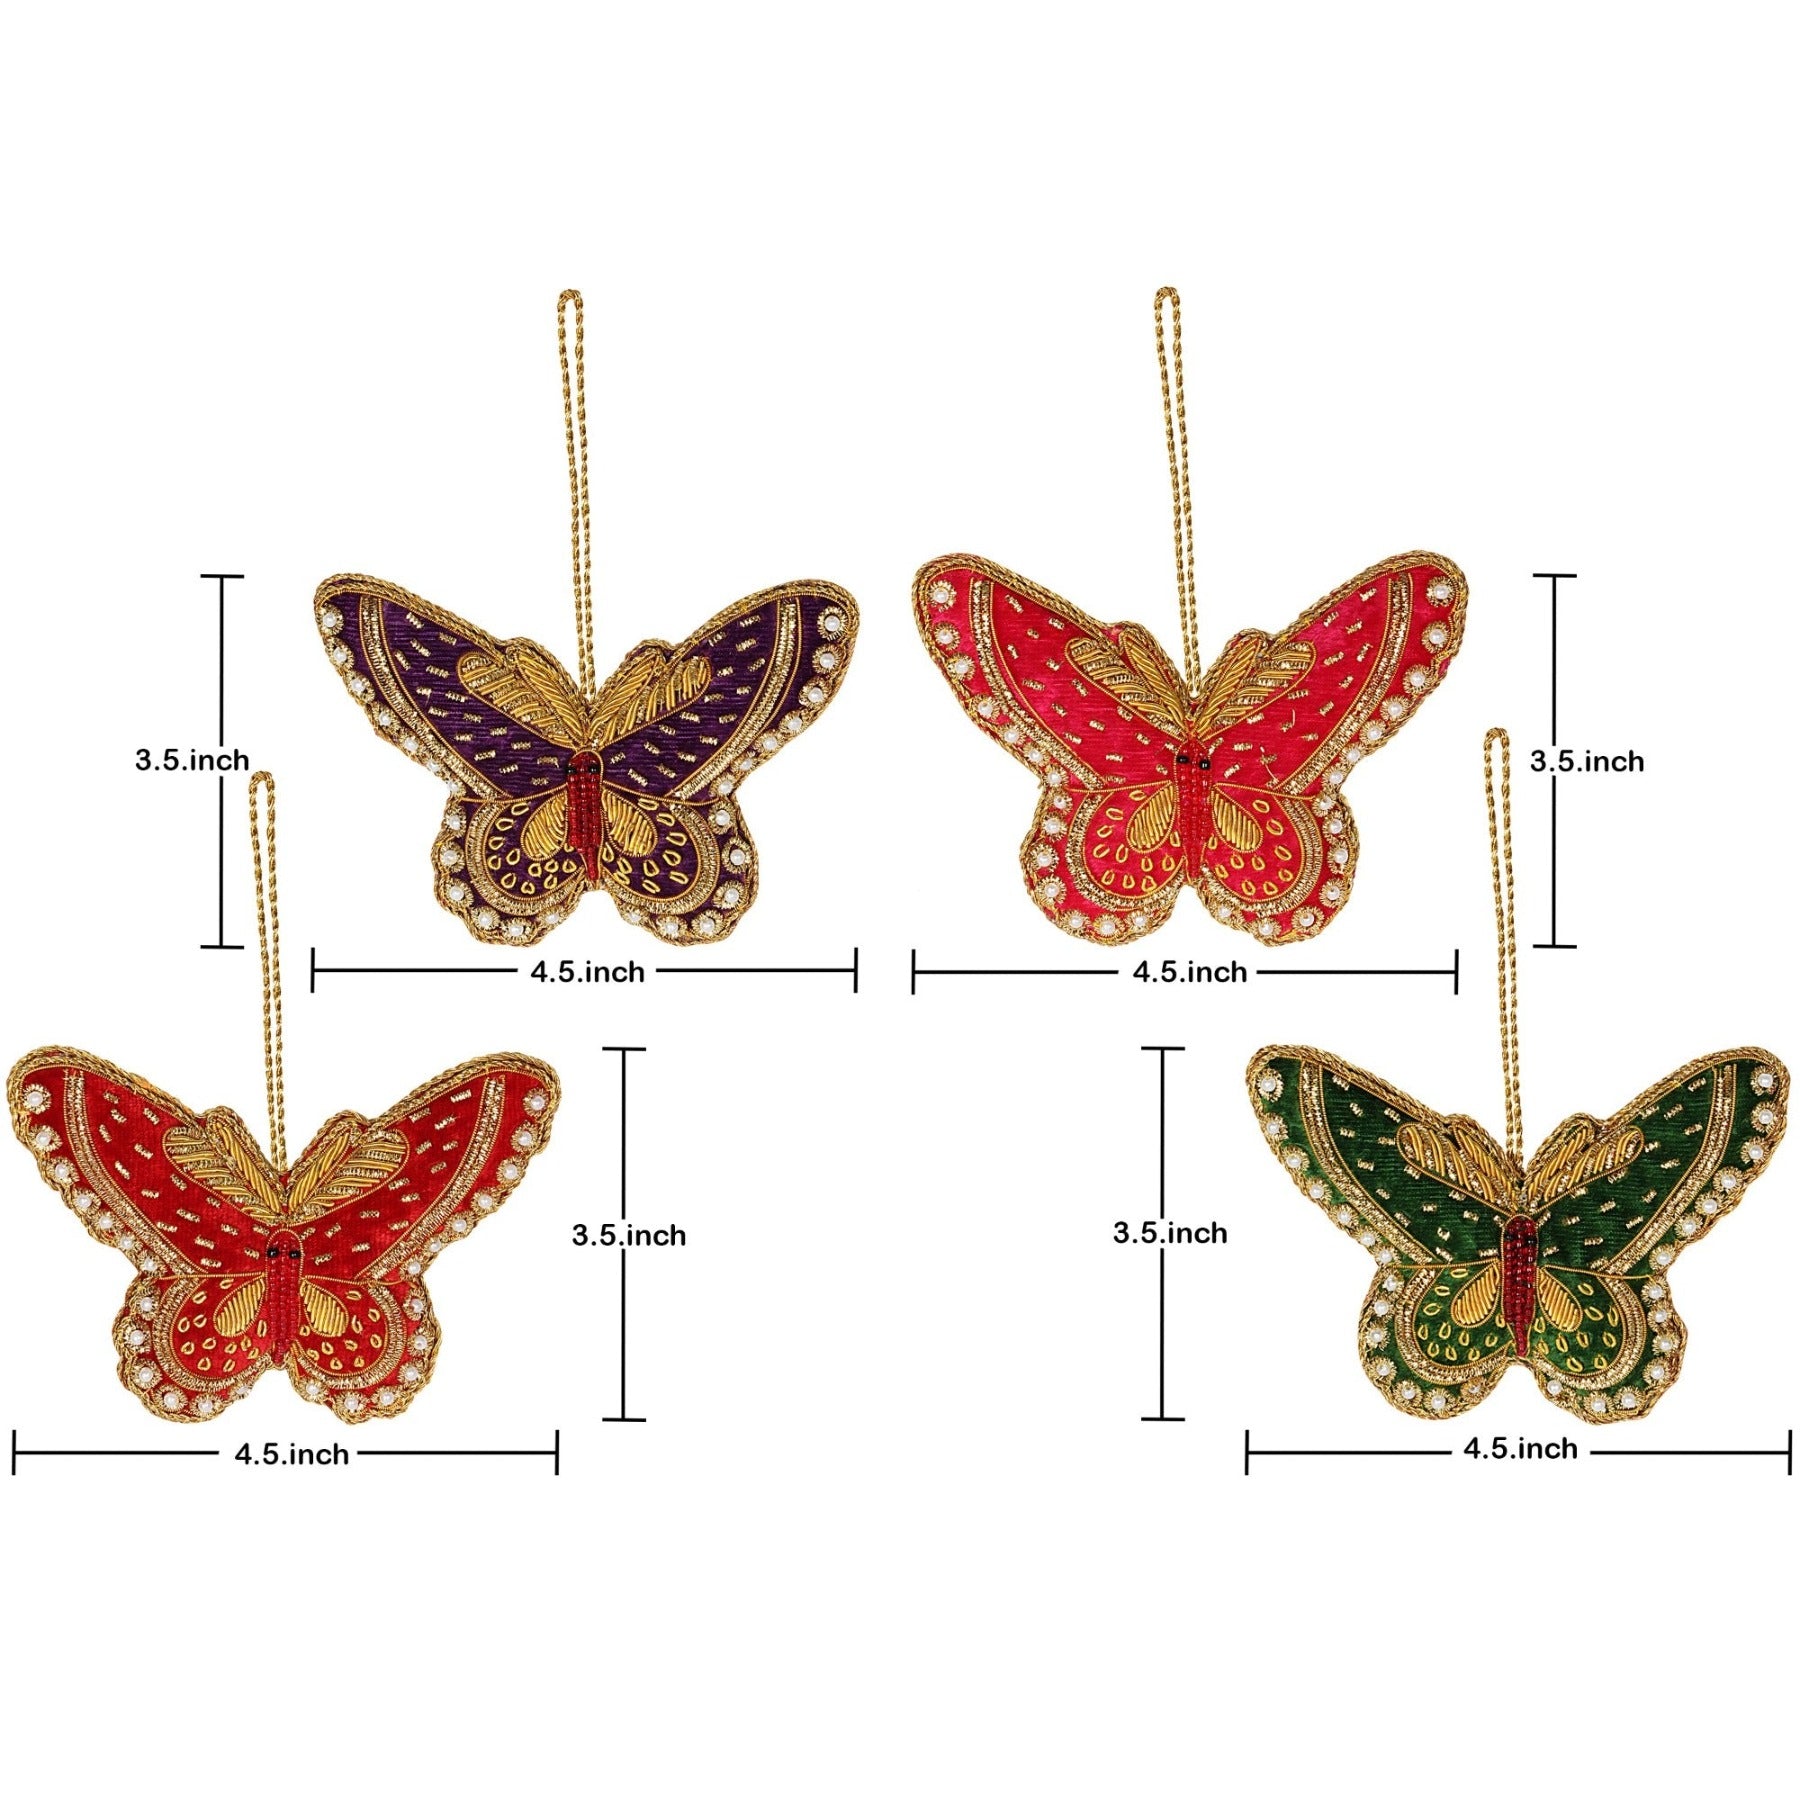 Butterfly Fantasy Christmas ornaments set of 4 pieces for holiday decor (1SET=4PC)